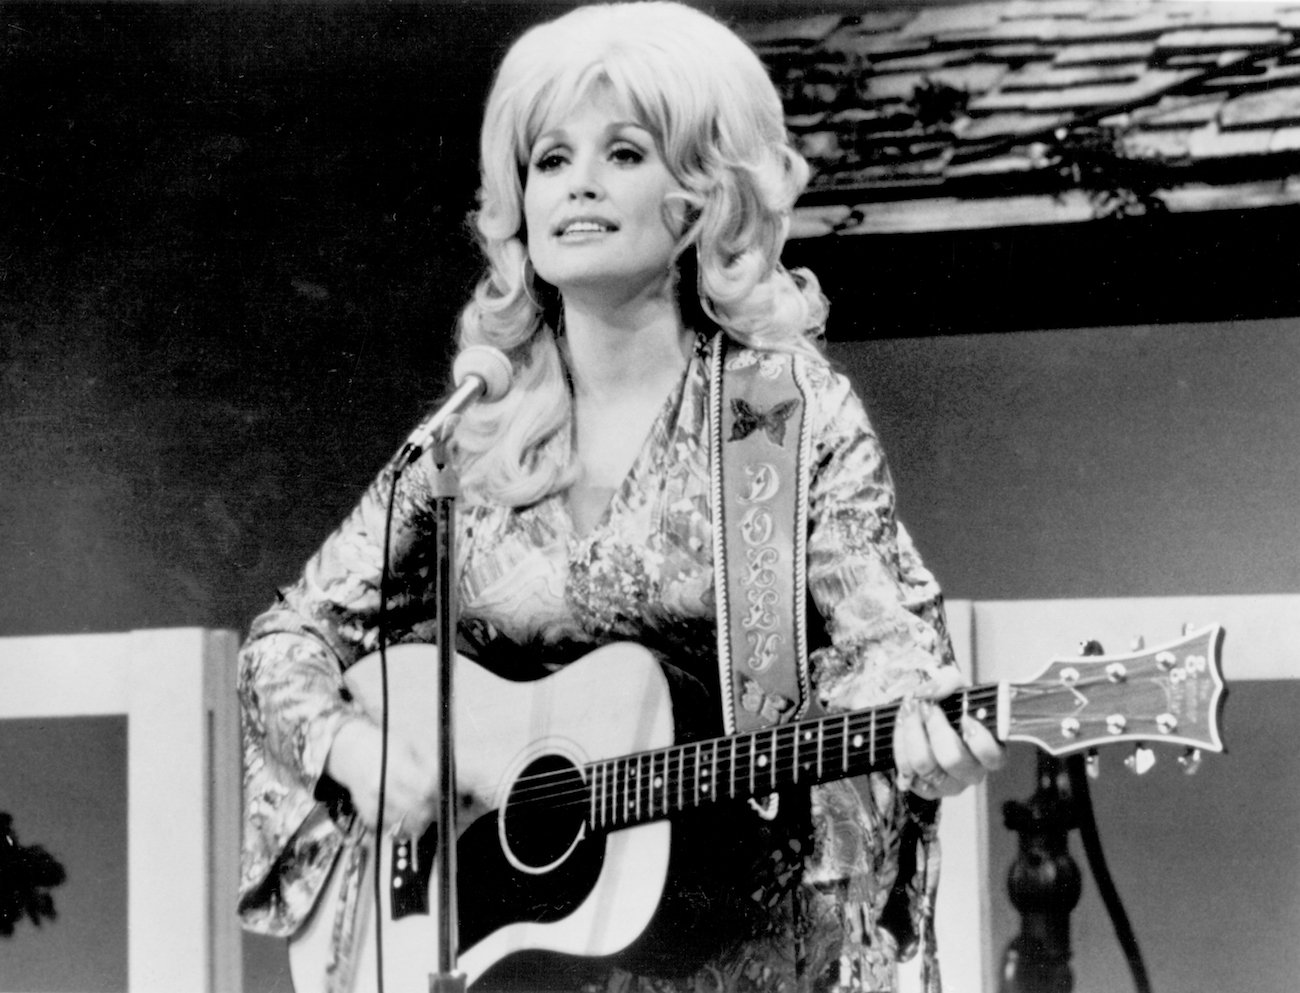 Dolly Parton playing an acoustic guitar during a performance in 1974.